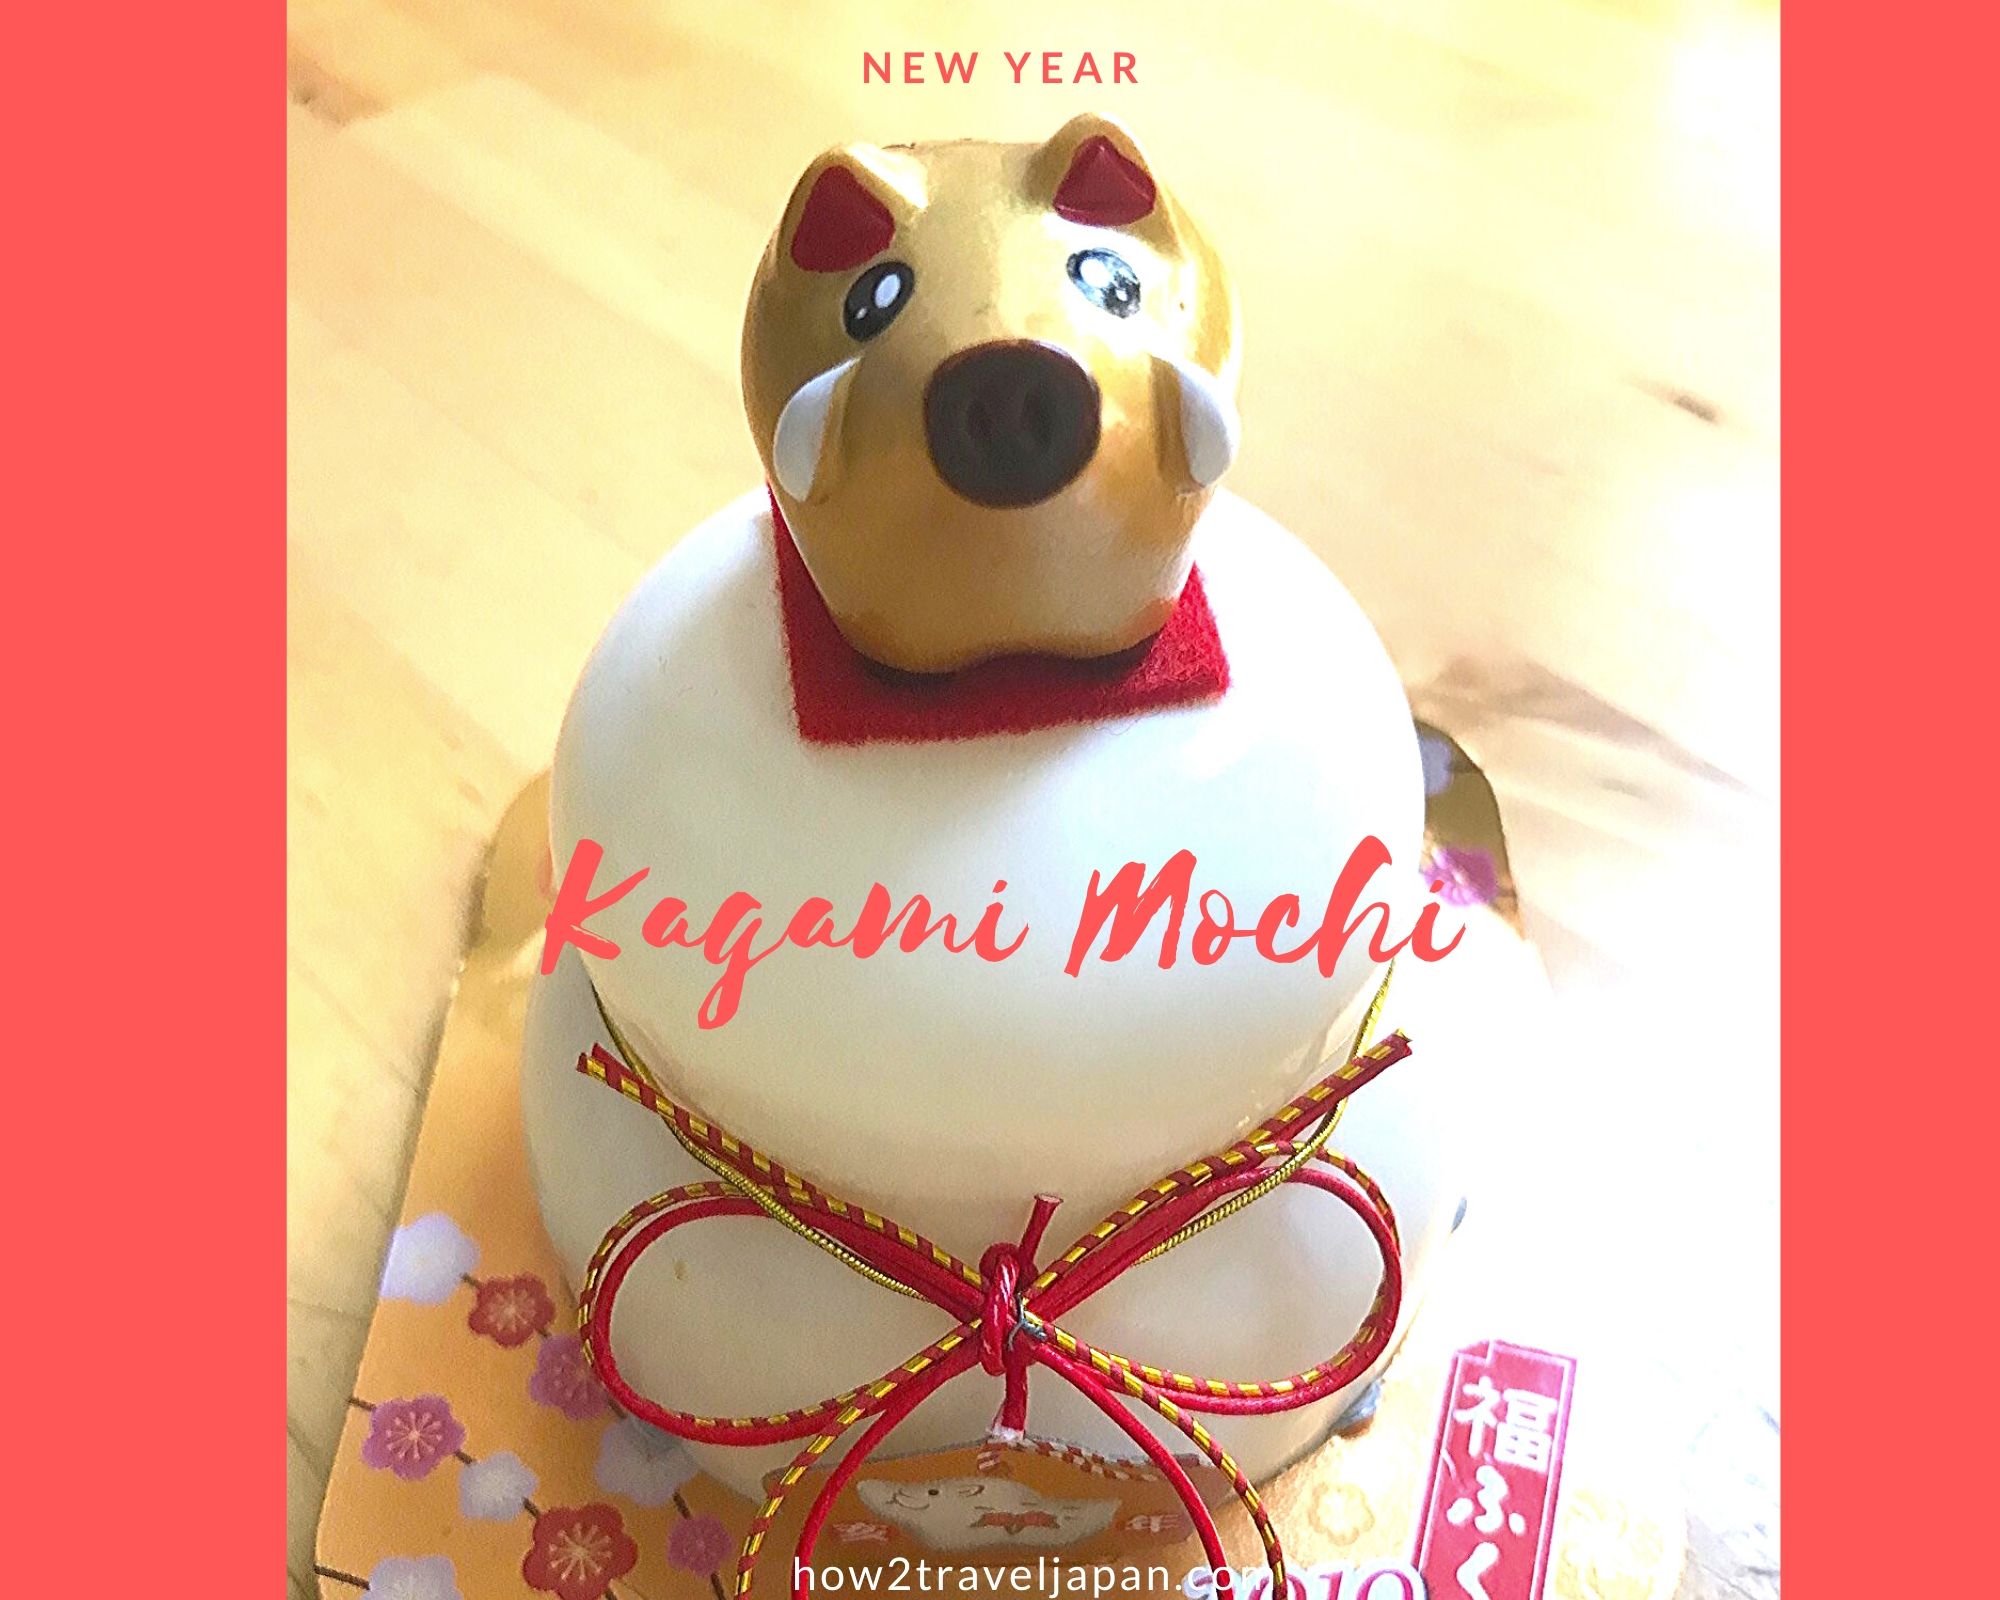 You are currently viewing Kagami Mochi, the Japanese eatable New Year’s decoration